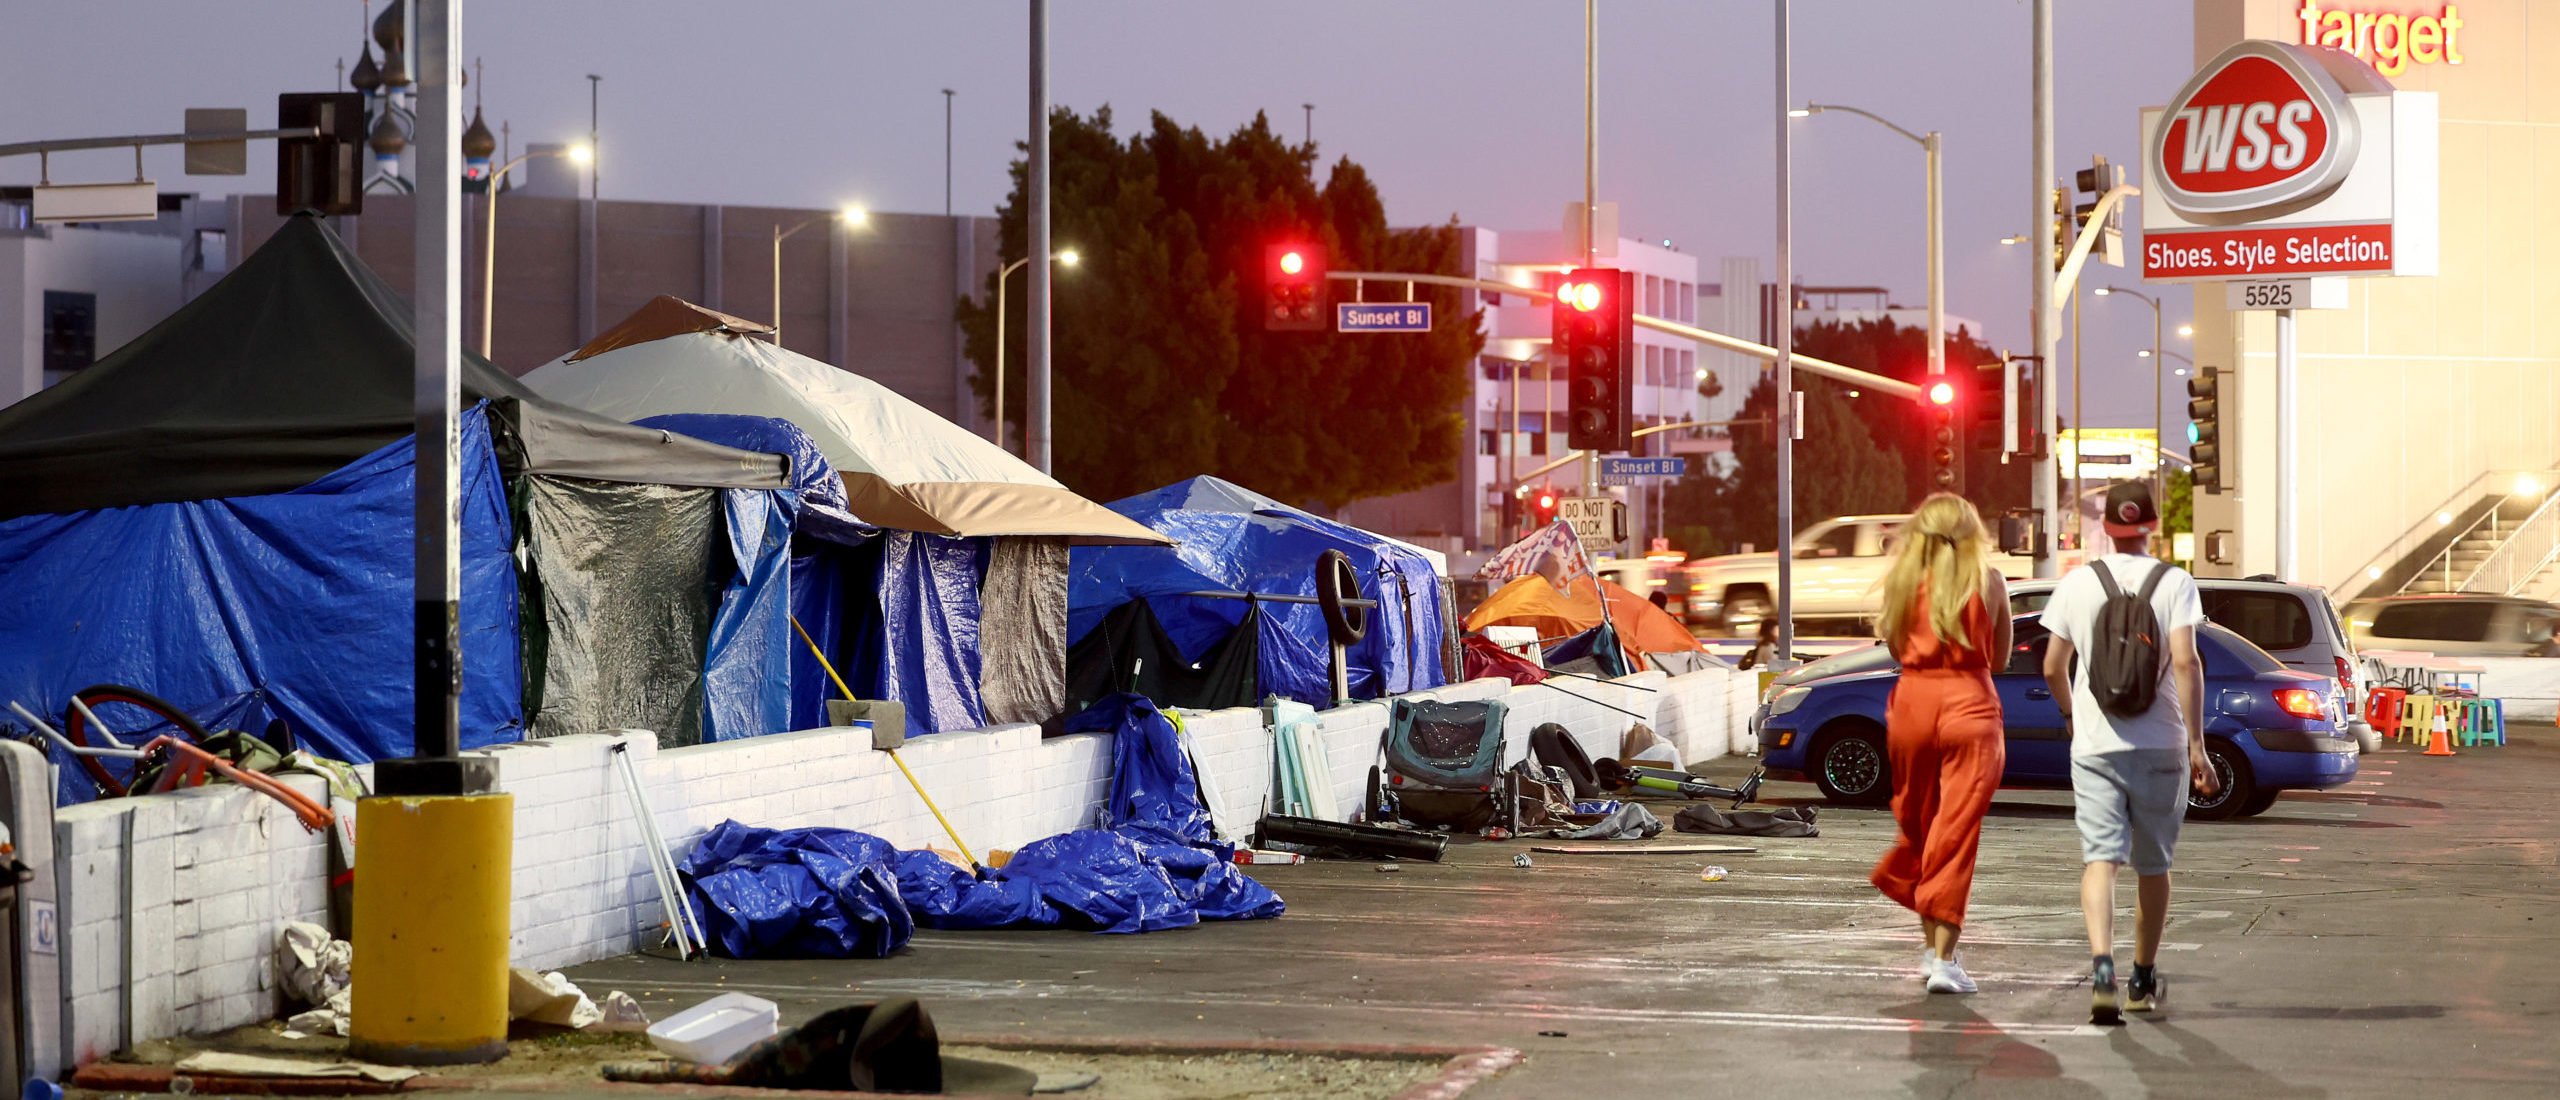 Homeless encampments (Photo by Mario Tama/Getty Images)